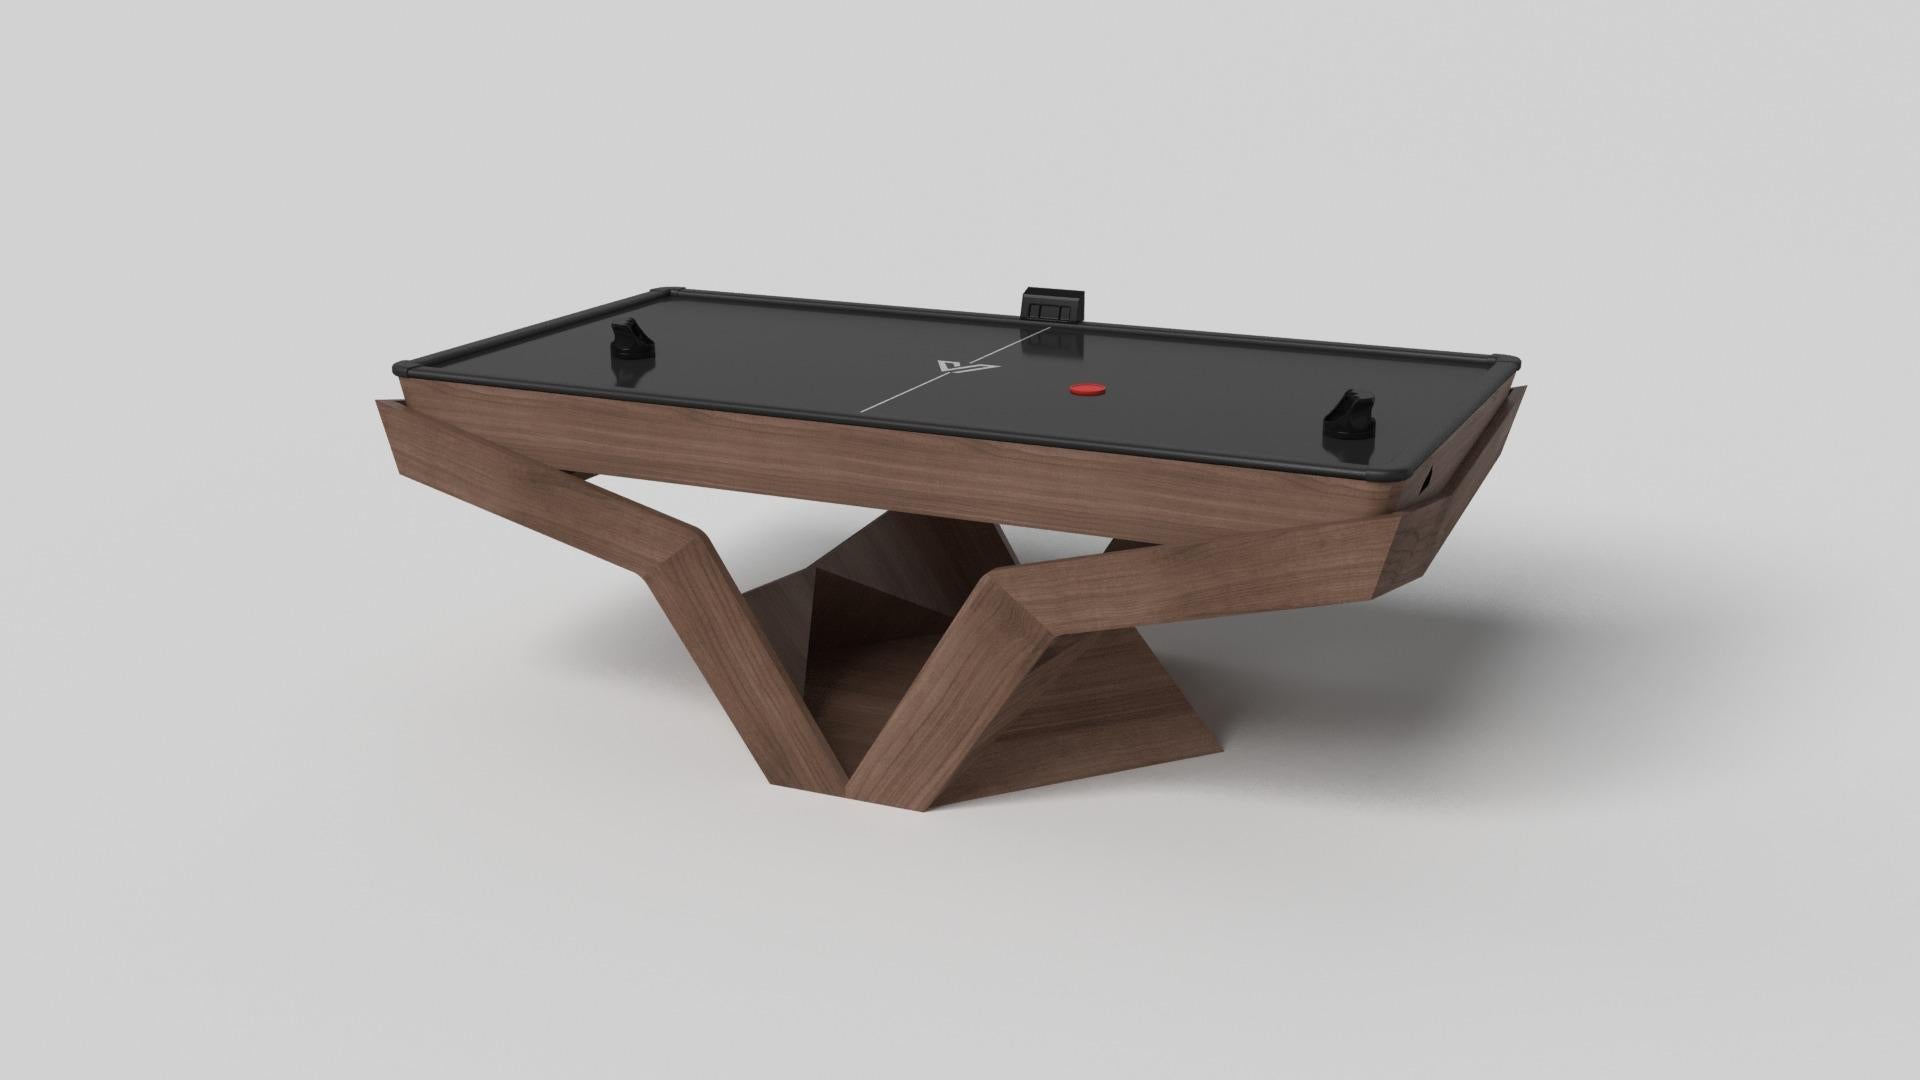 The Enzo air hockey table is Inspired by the aerodynamic angles of top-of-the-line European vehicles. Designed with sleek, V-shaped lines and a thoughtful use of negative space, this table boasts an energetic sense of spirit while epitomizing the